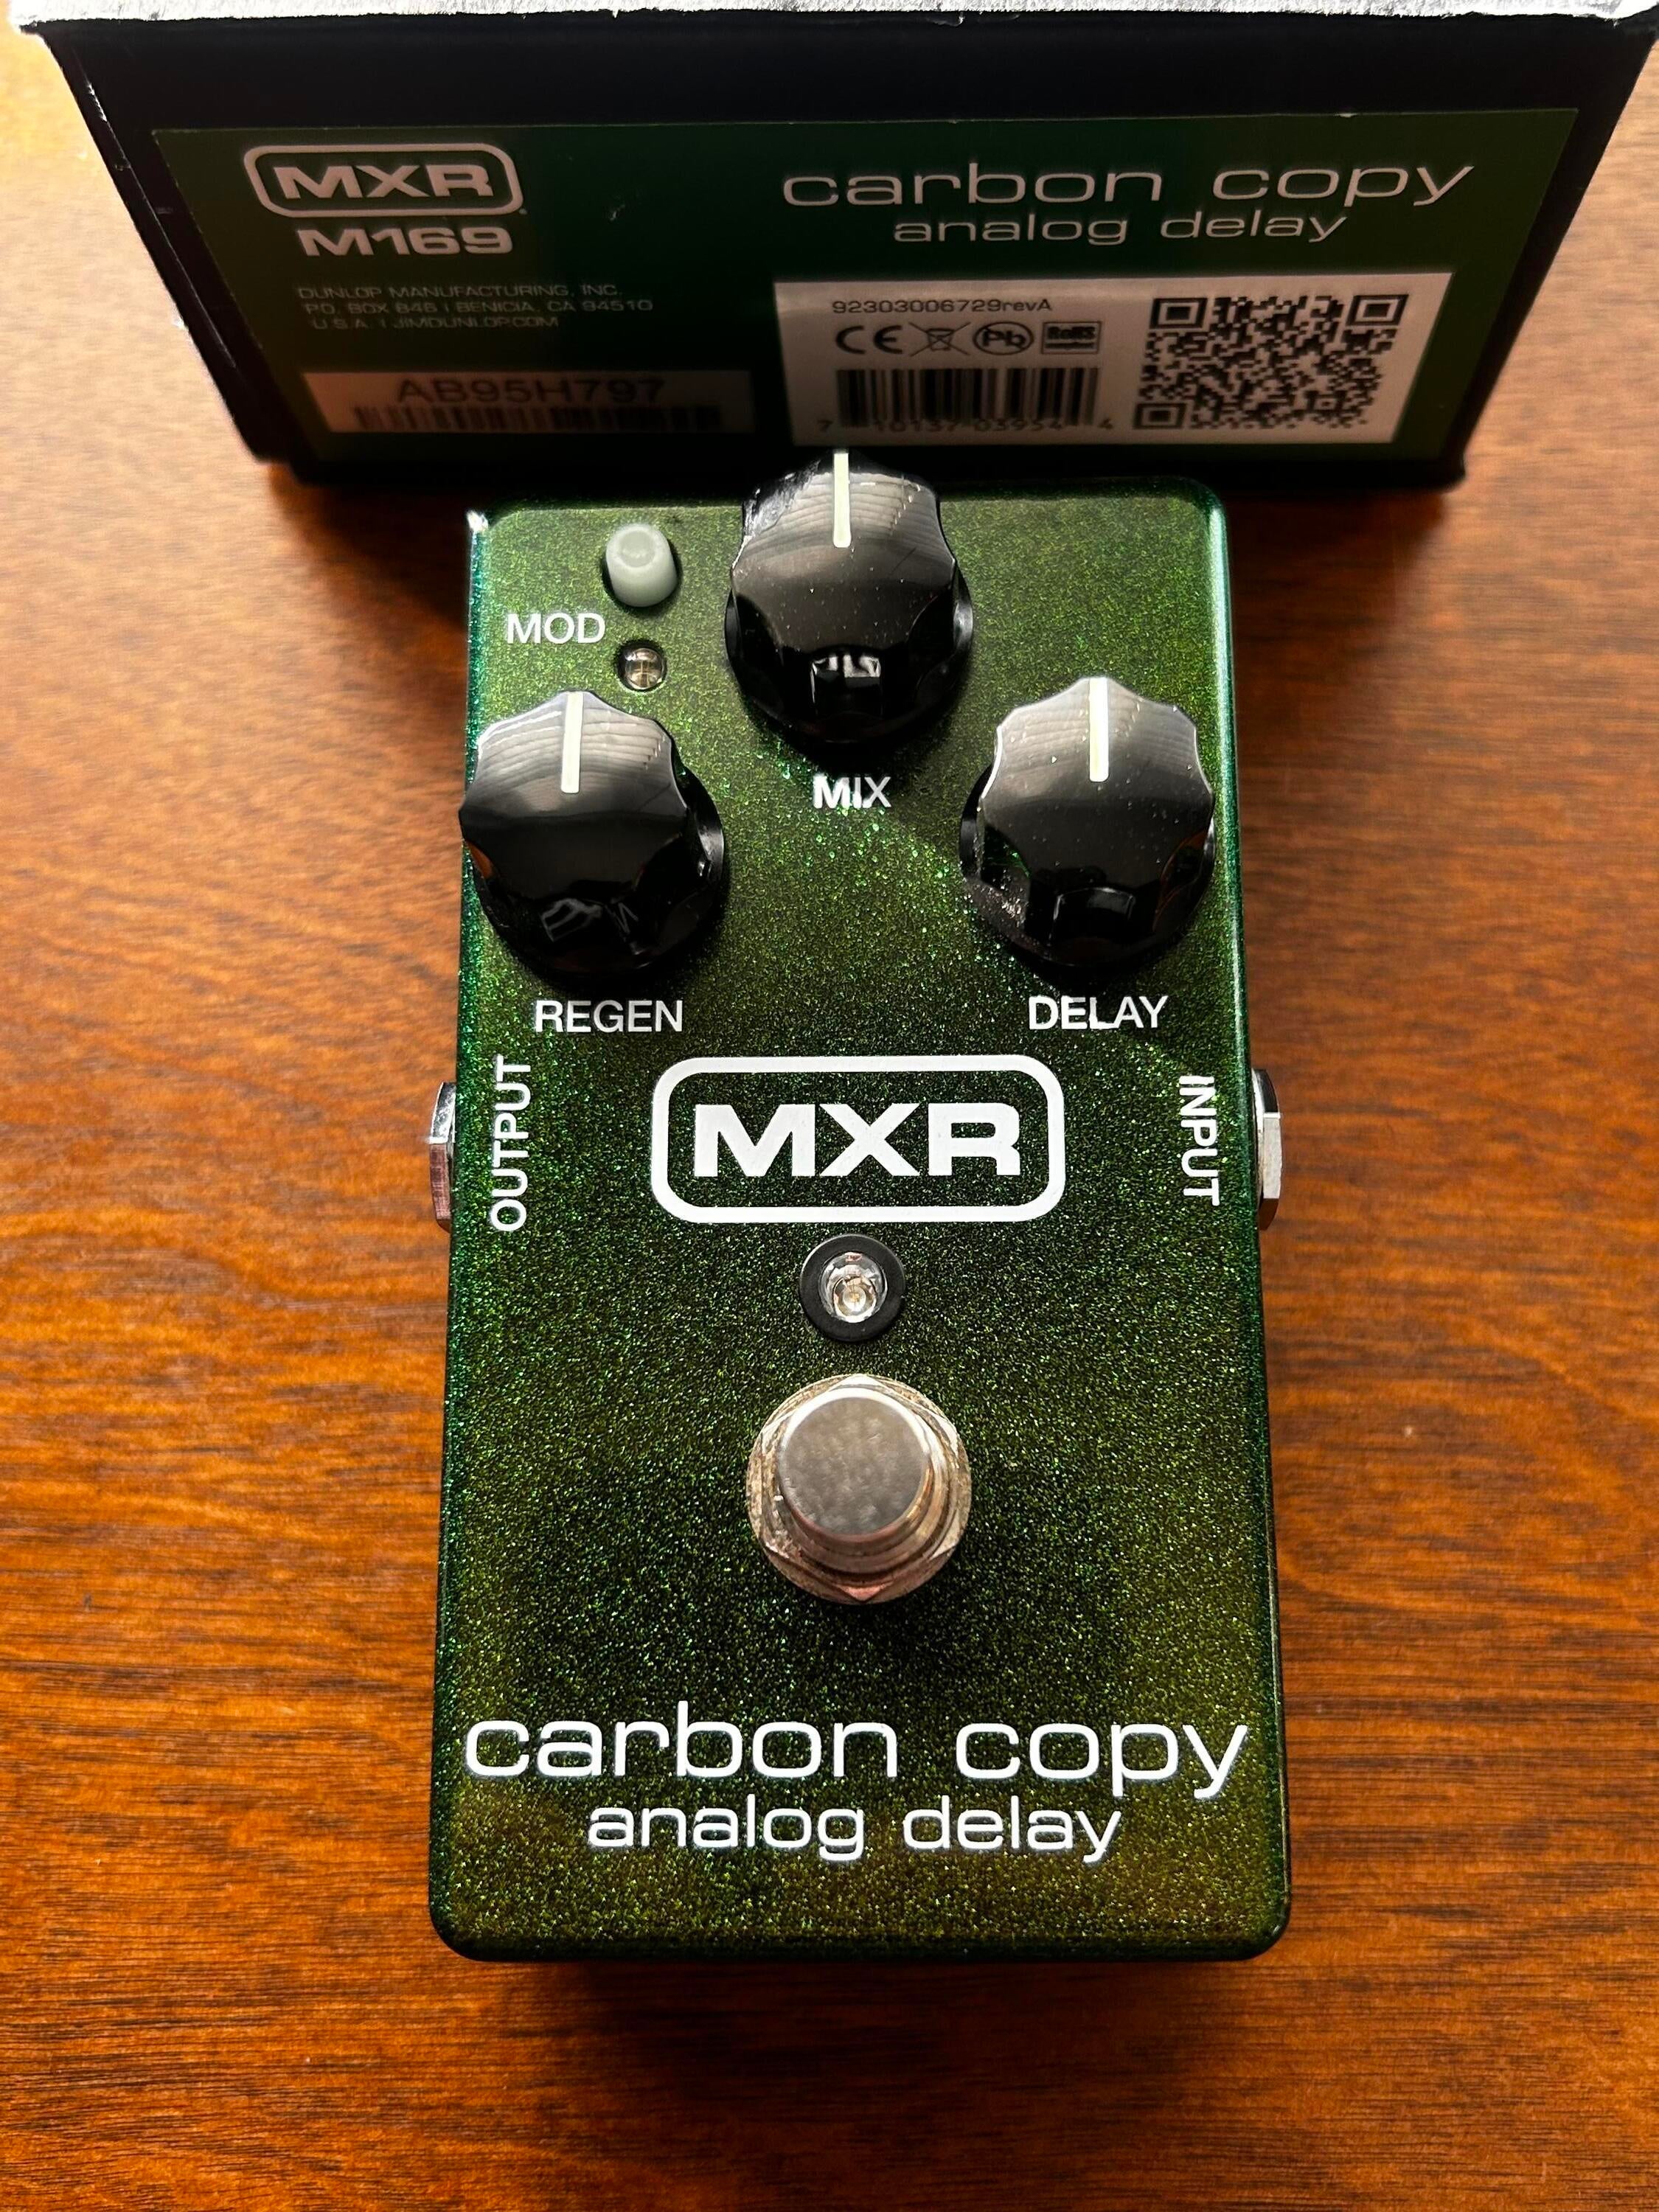 Used MXR M169 Carbon Copy Analog Delay Pedal - Sweetwater's Gear